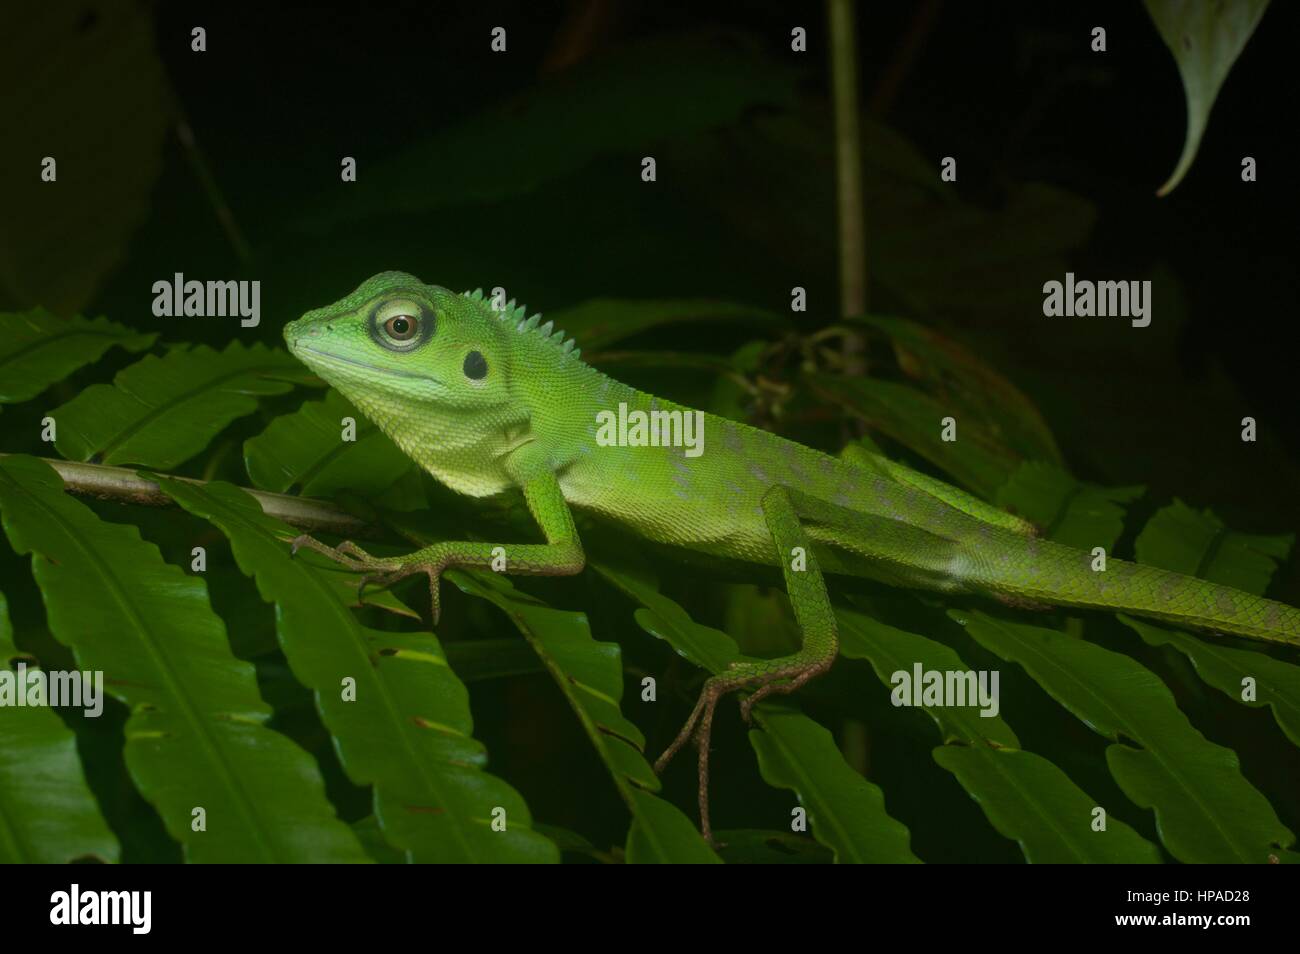 A Green Crested Lizard (Bronchocela cristatella) resting in the Malaysian forest at night Stock Photo